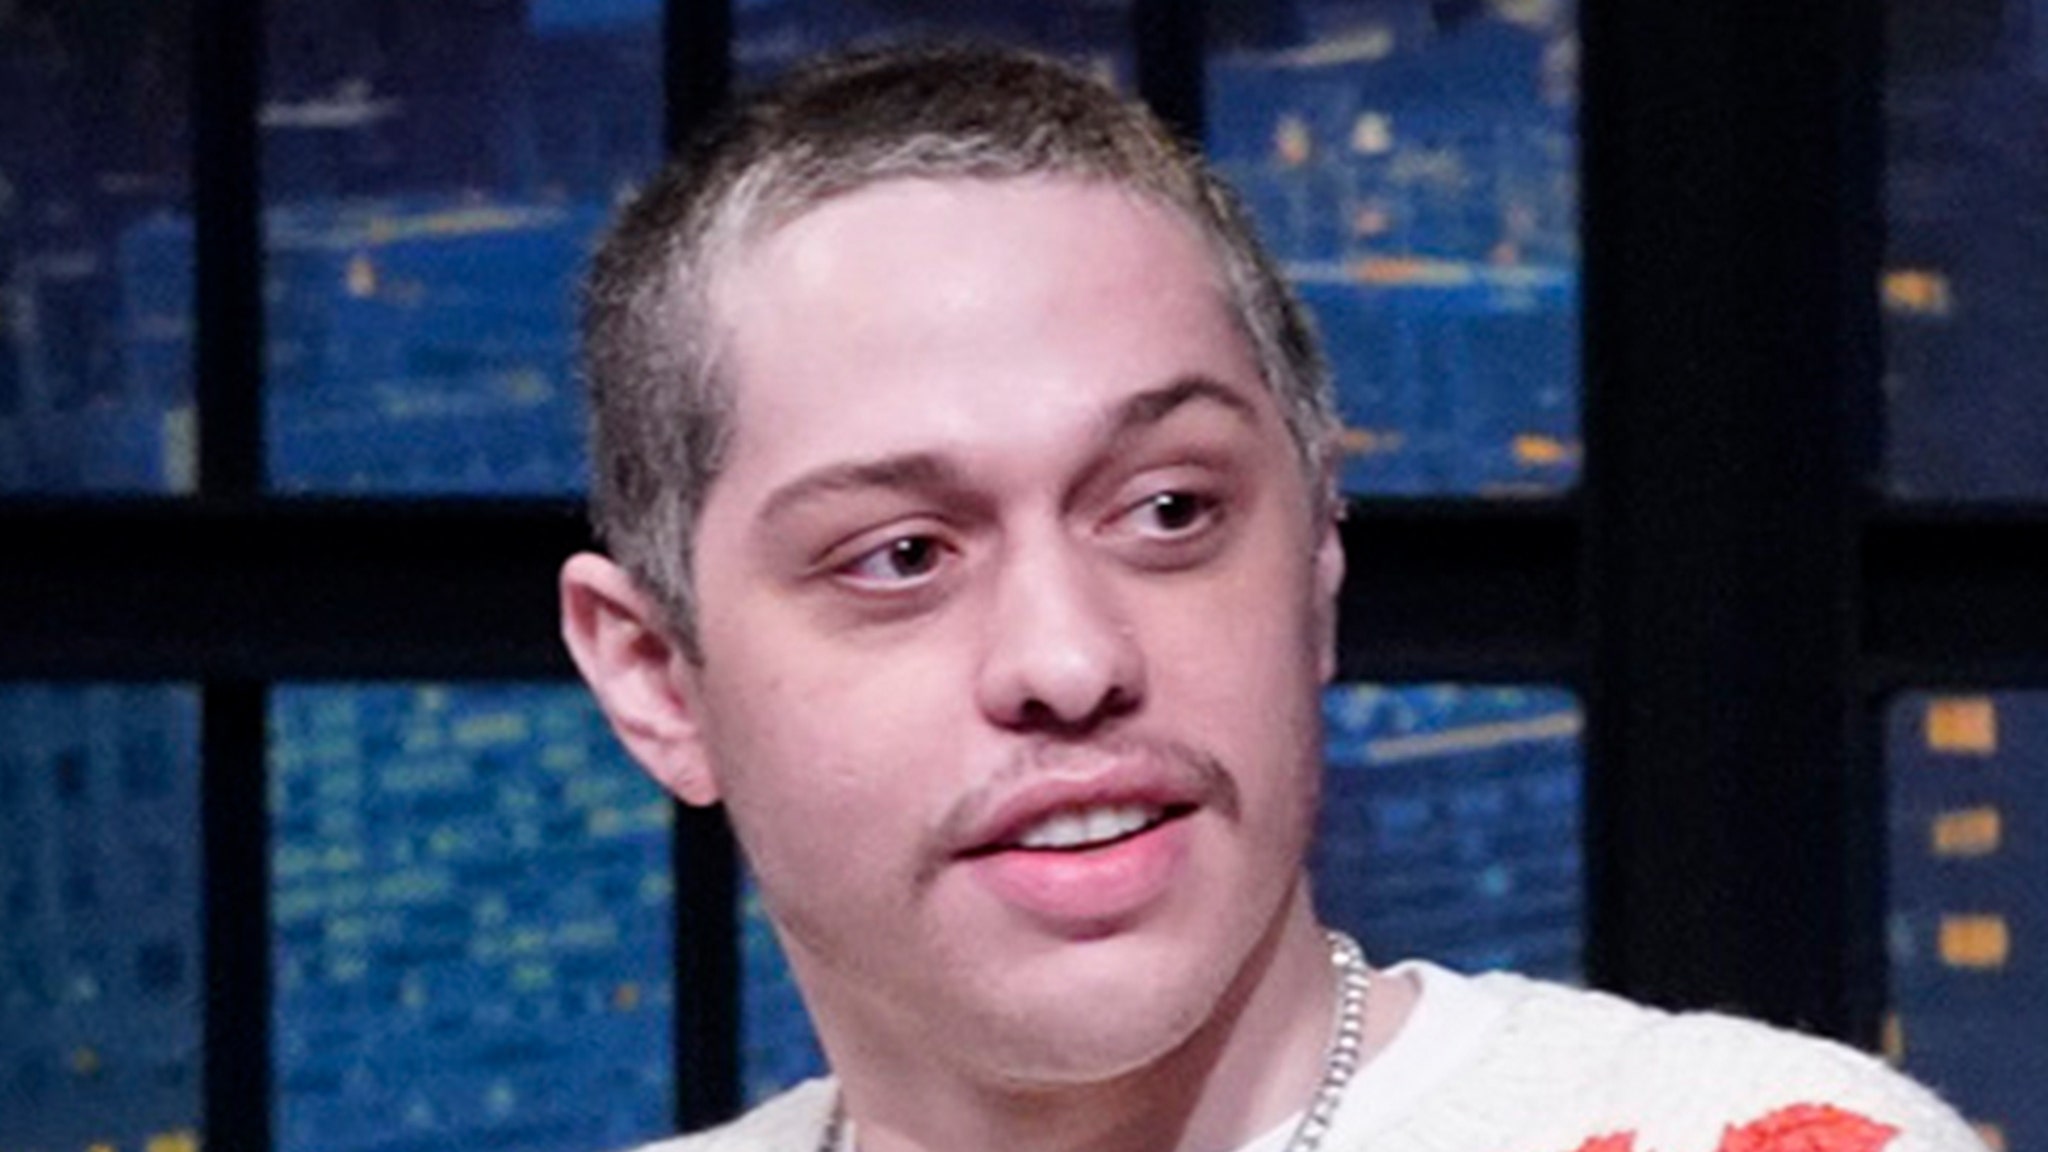 Pete Davidson Expected to Leave 'SNL' After This Week